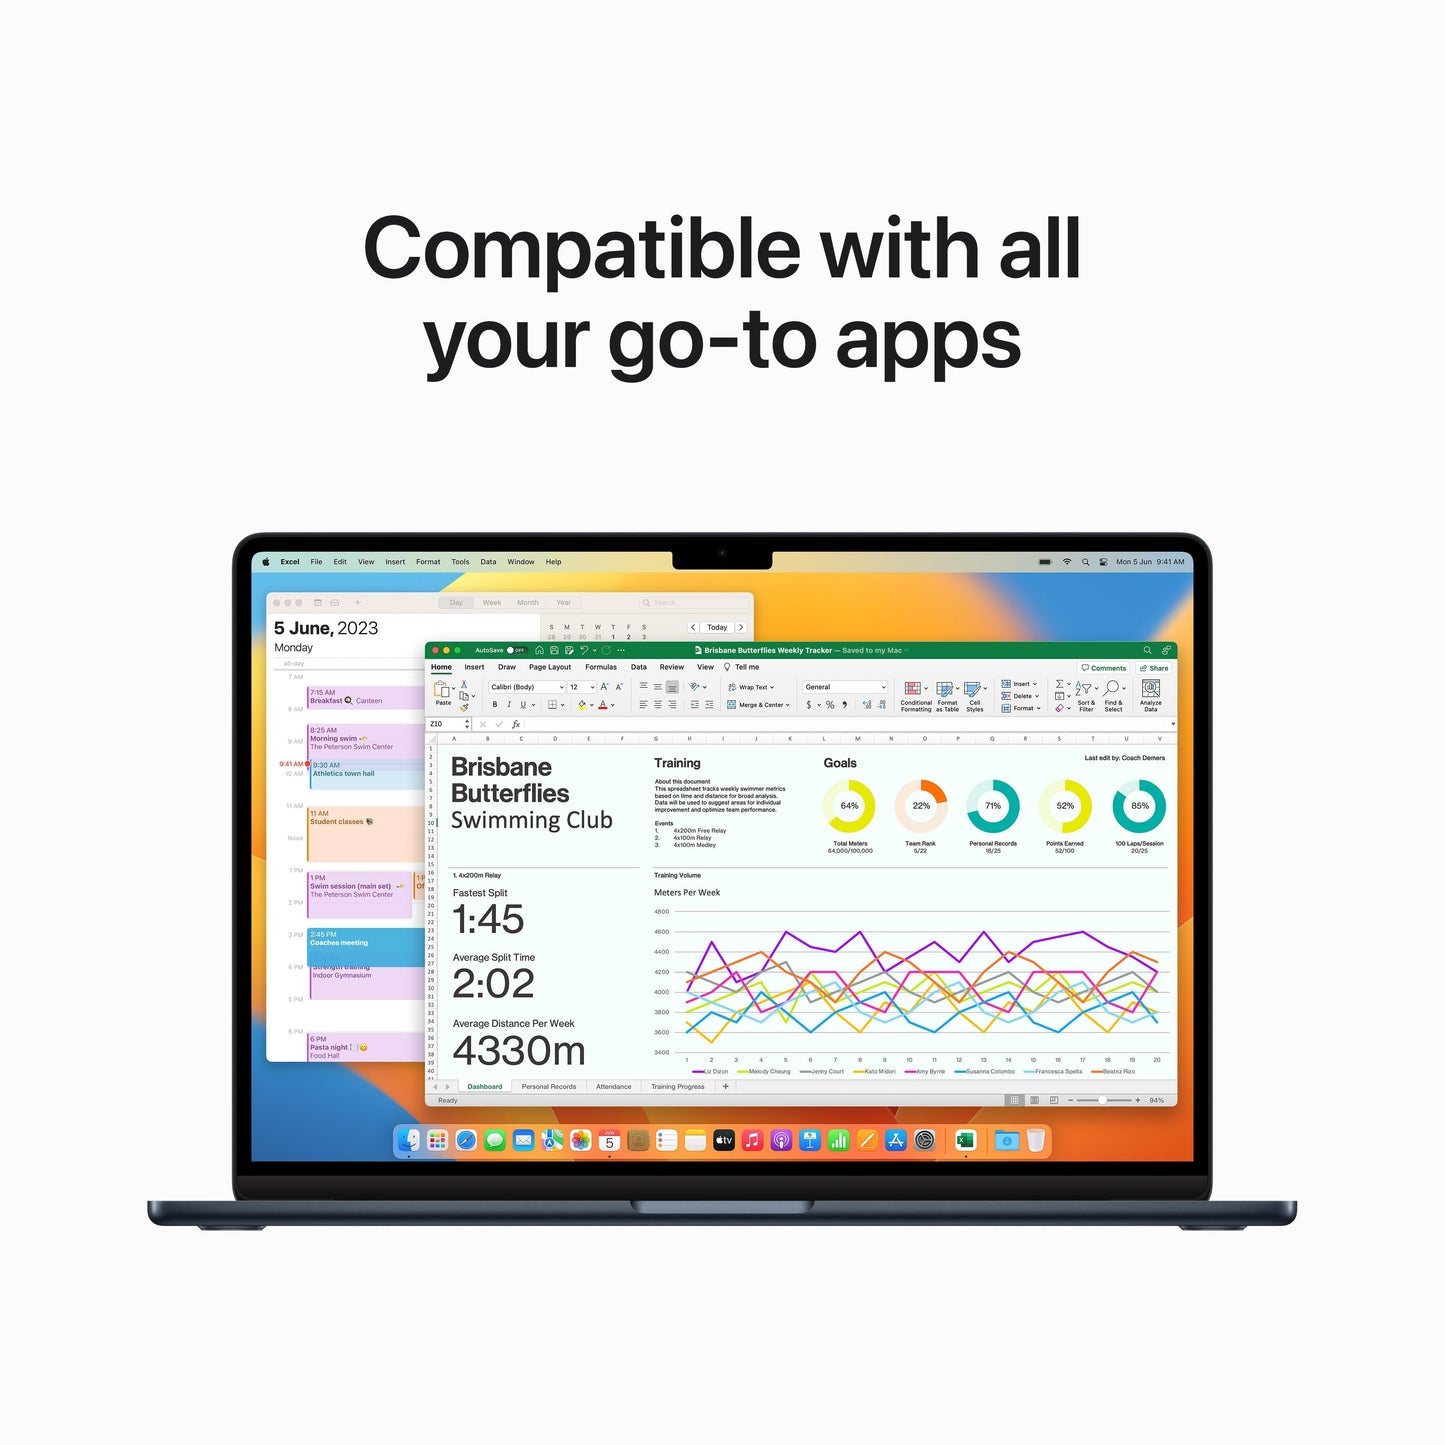 15-inch MacBook Air: Apple M2 chip with 8‑core CPU and 10‑core GPU, 256GB SSD - Midnight - US English Keyboard